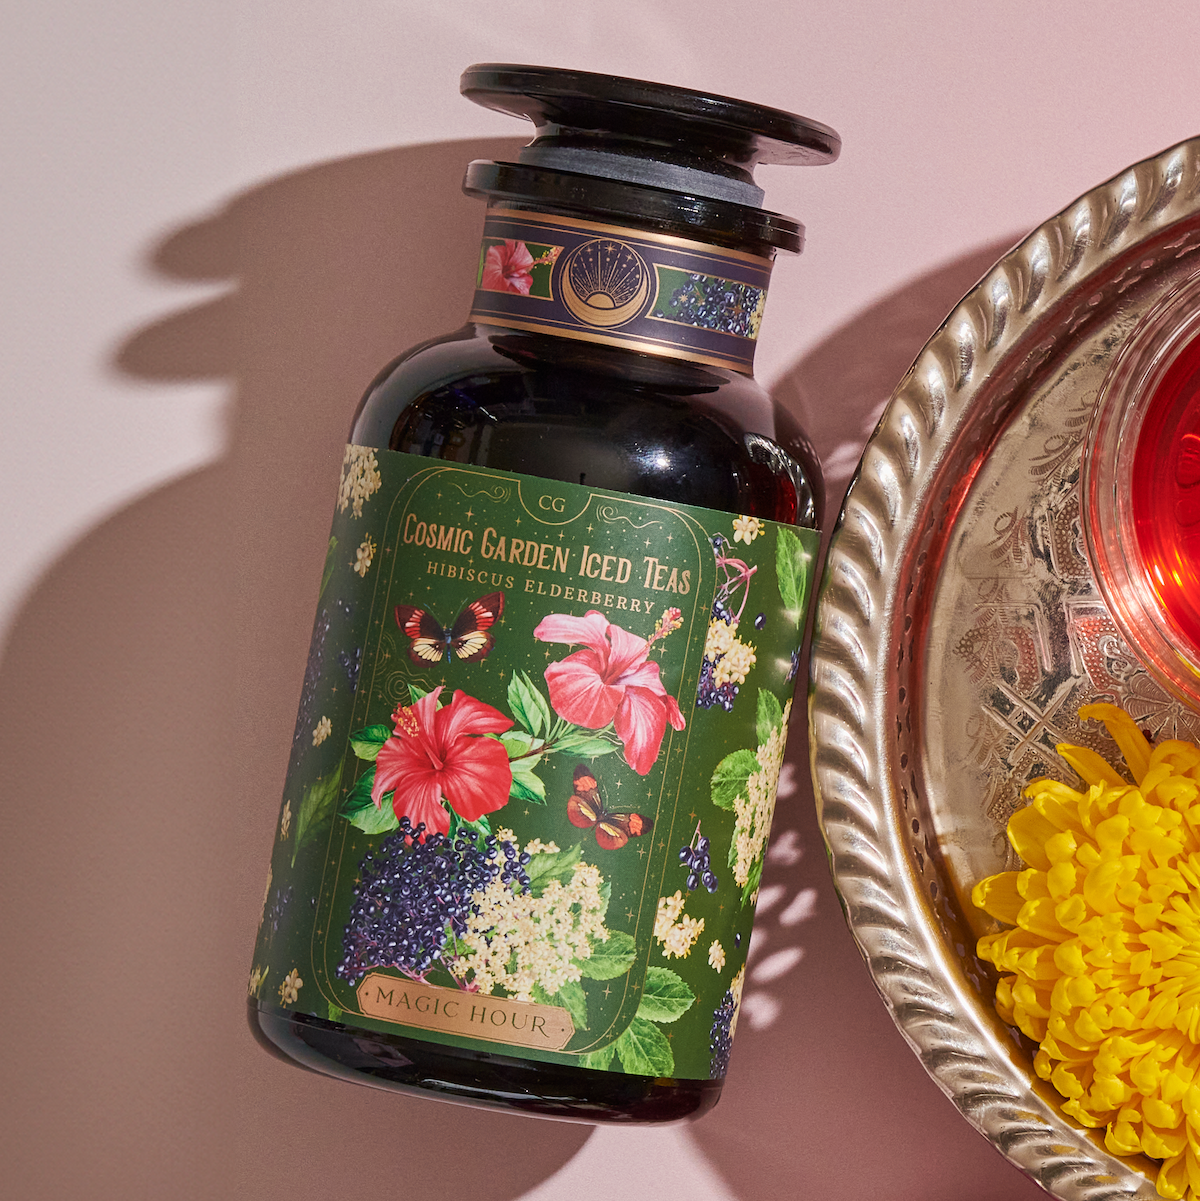 A dark glass bottle labeled "Hibiscus Elderberry: Cosmic Garden Iced Tea - Magic Hour" lies on a pink surface. The bottle features colorful illustrations of hibiscus flowers and butterflies, reminiscent of a Magic Hour Tea. Nearby, a silver tray with a red candle and yellow flowers is partially visible.